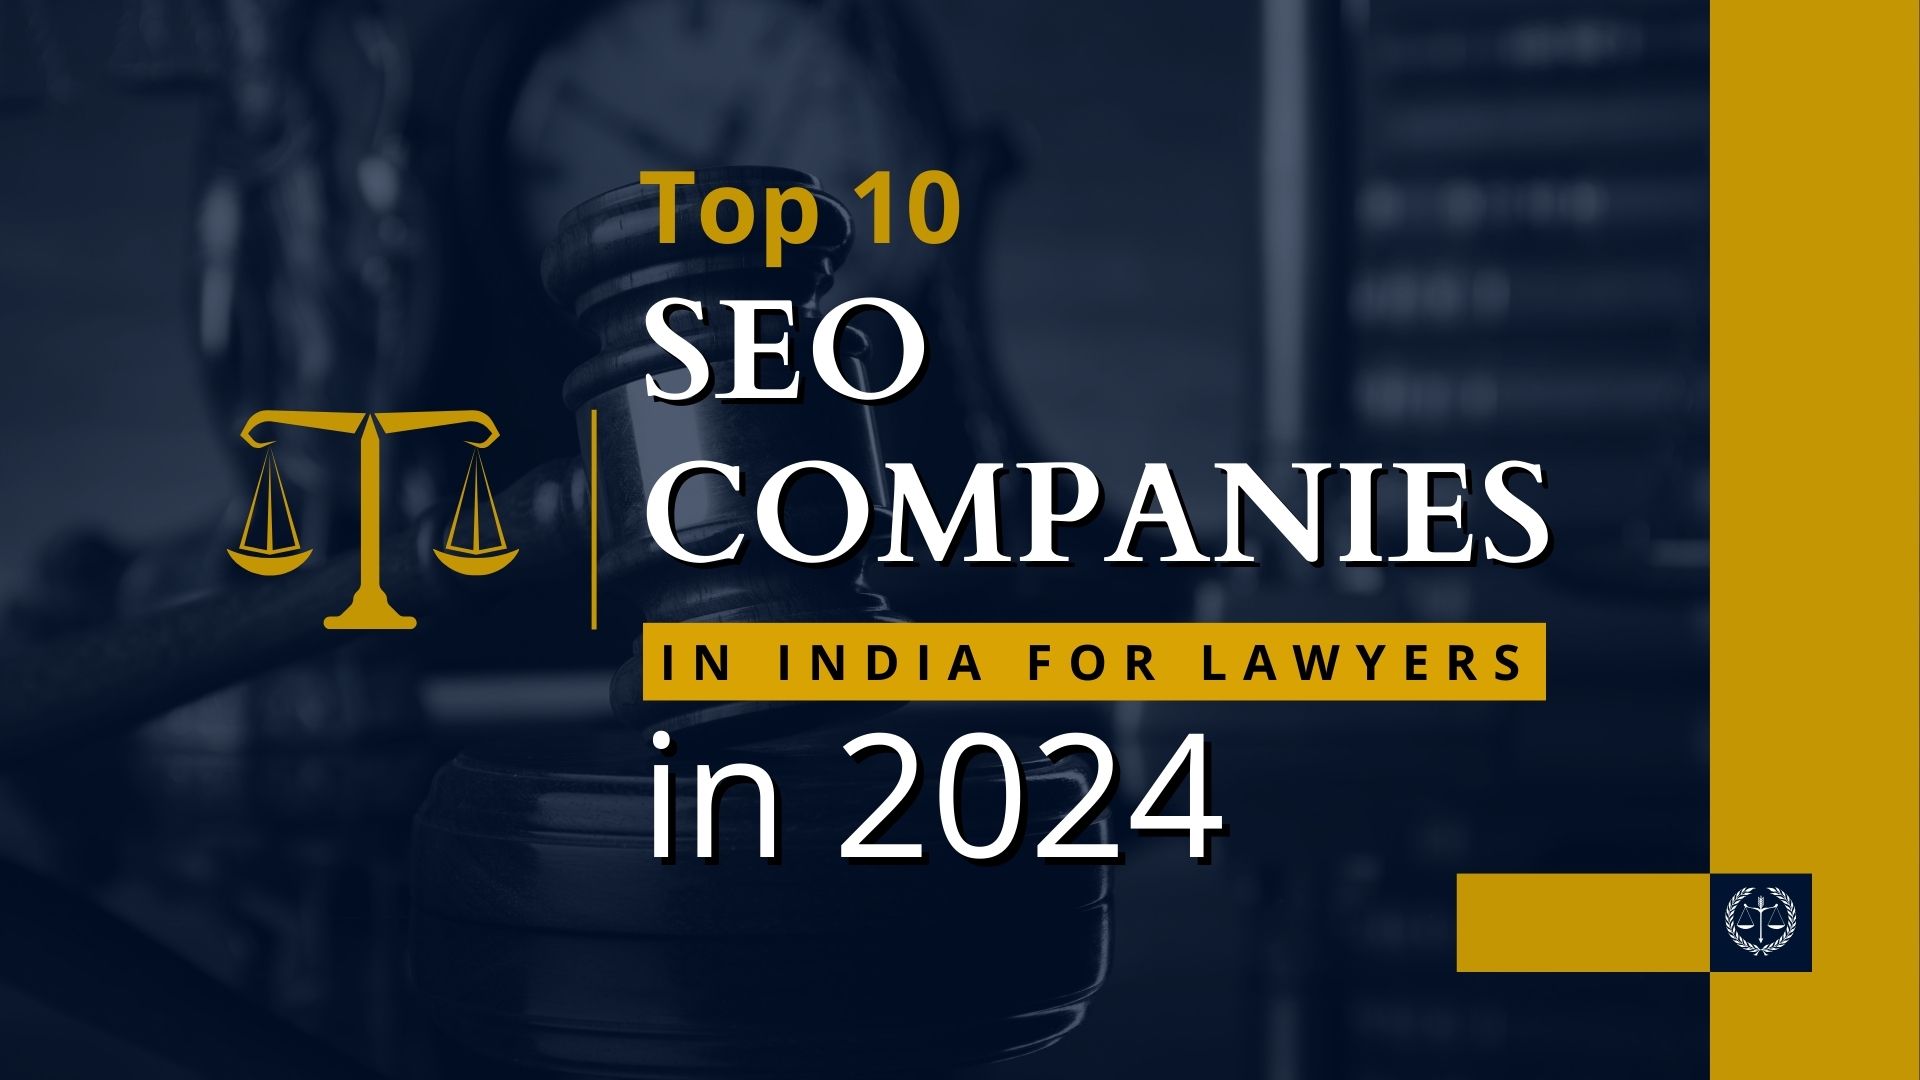 Discover the Top 10 SEO Companies in India for lawyers in 2024 - Your Ultimate Guide to Increasing Client Attraction